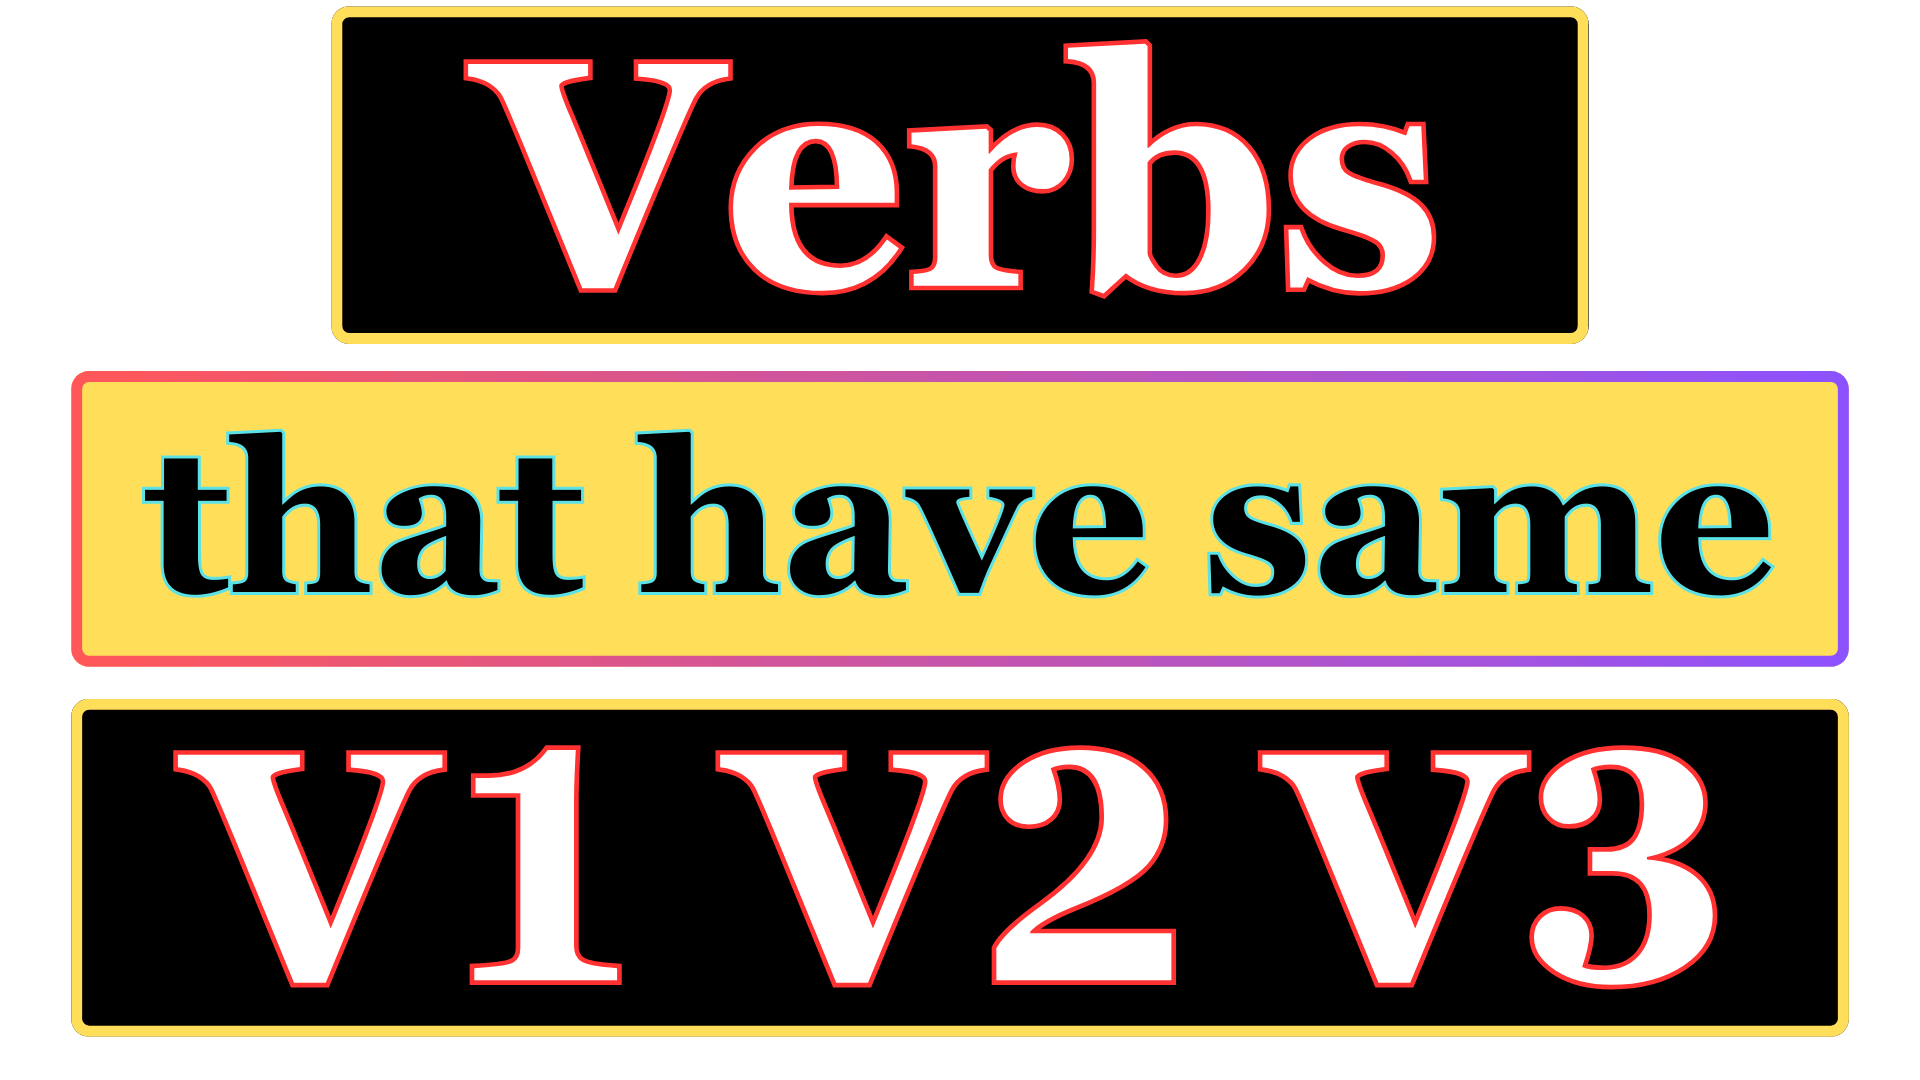 Verbs that have the same present (v1), past (v2), and past participle (v3)